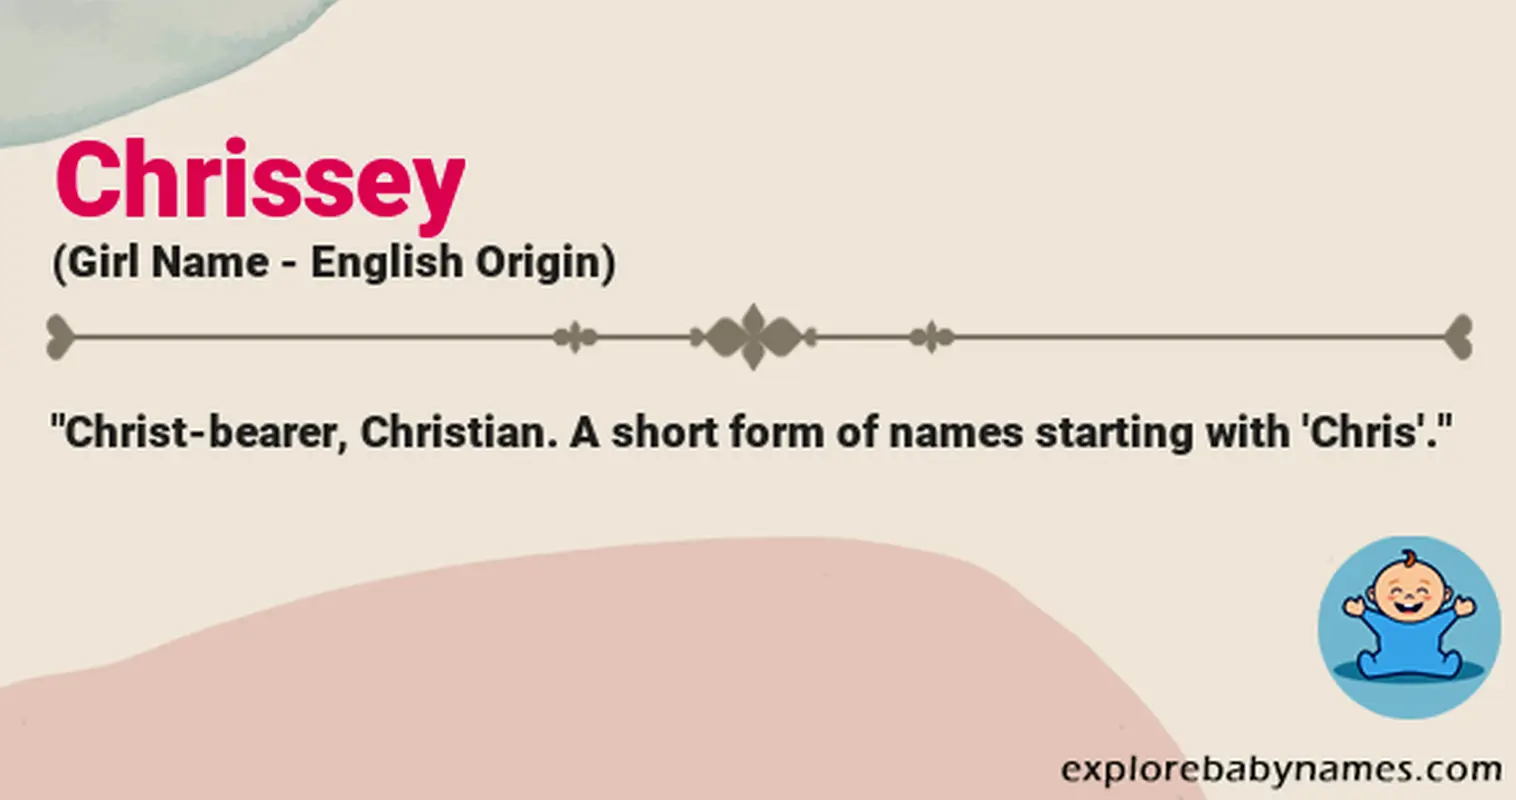 Meaning of Chrissey